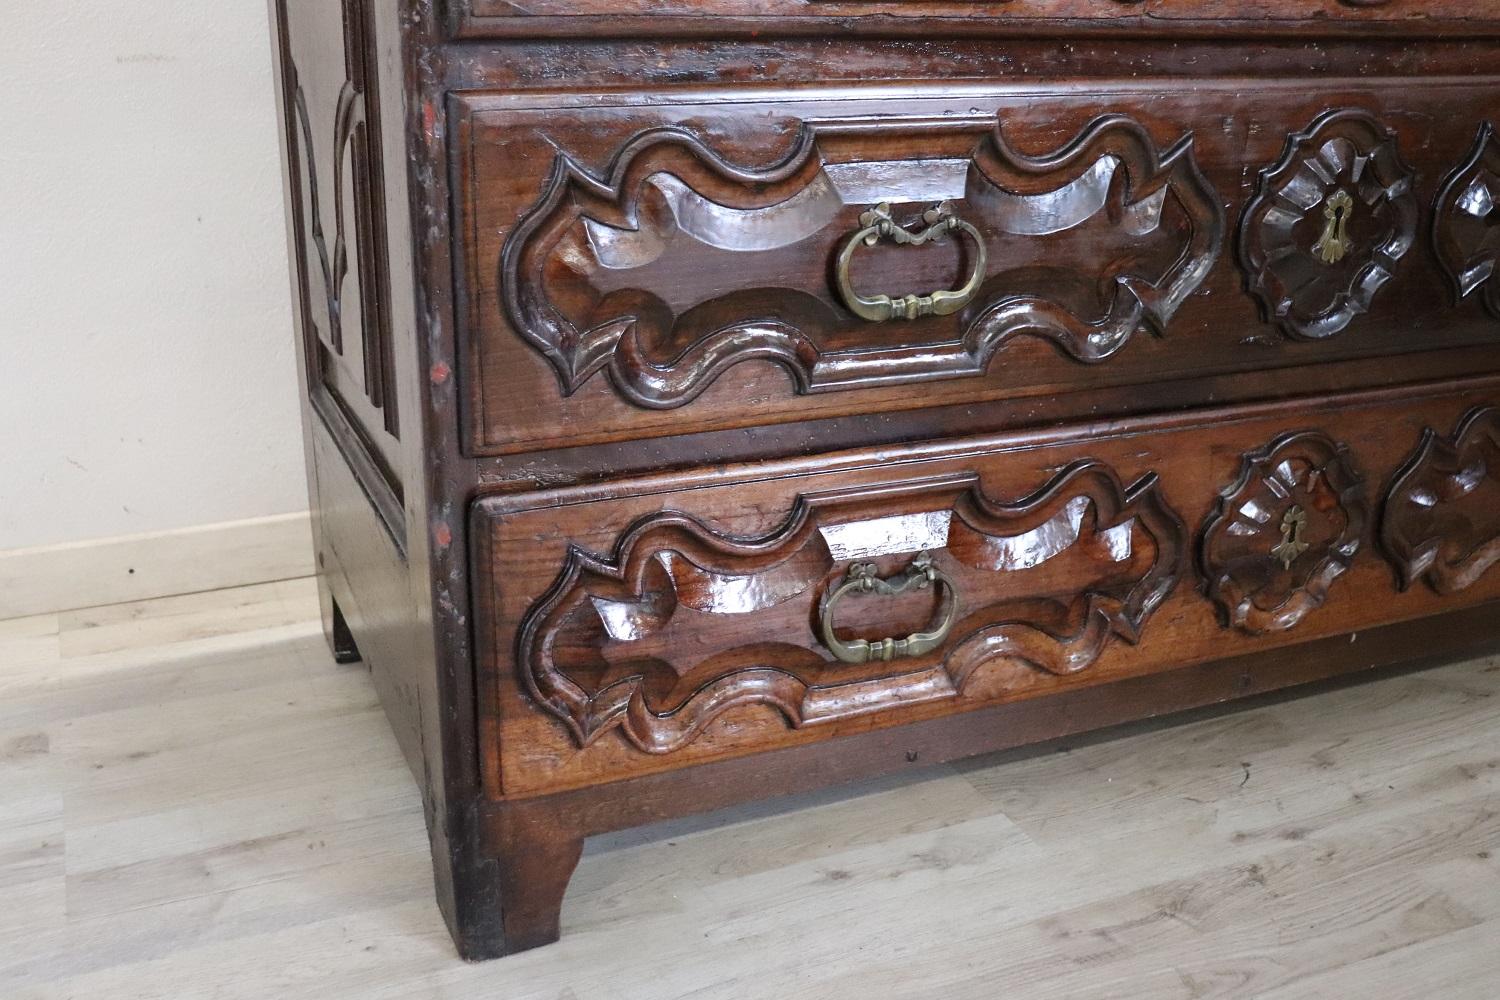 Late 17th Century 17th Century Italian Louis XIV Carved Walnut Antique Commode or Chest of Drawers For Sale